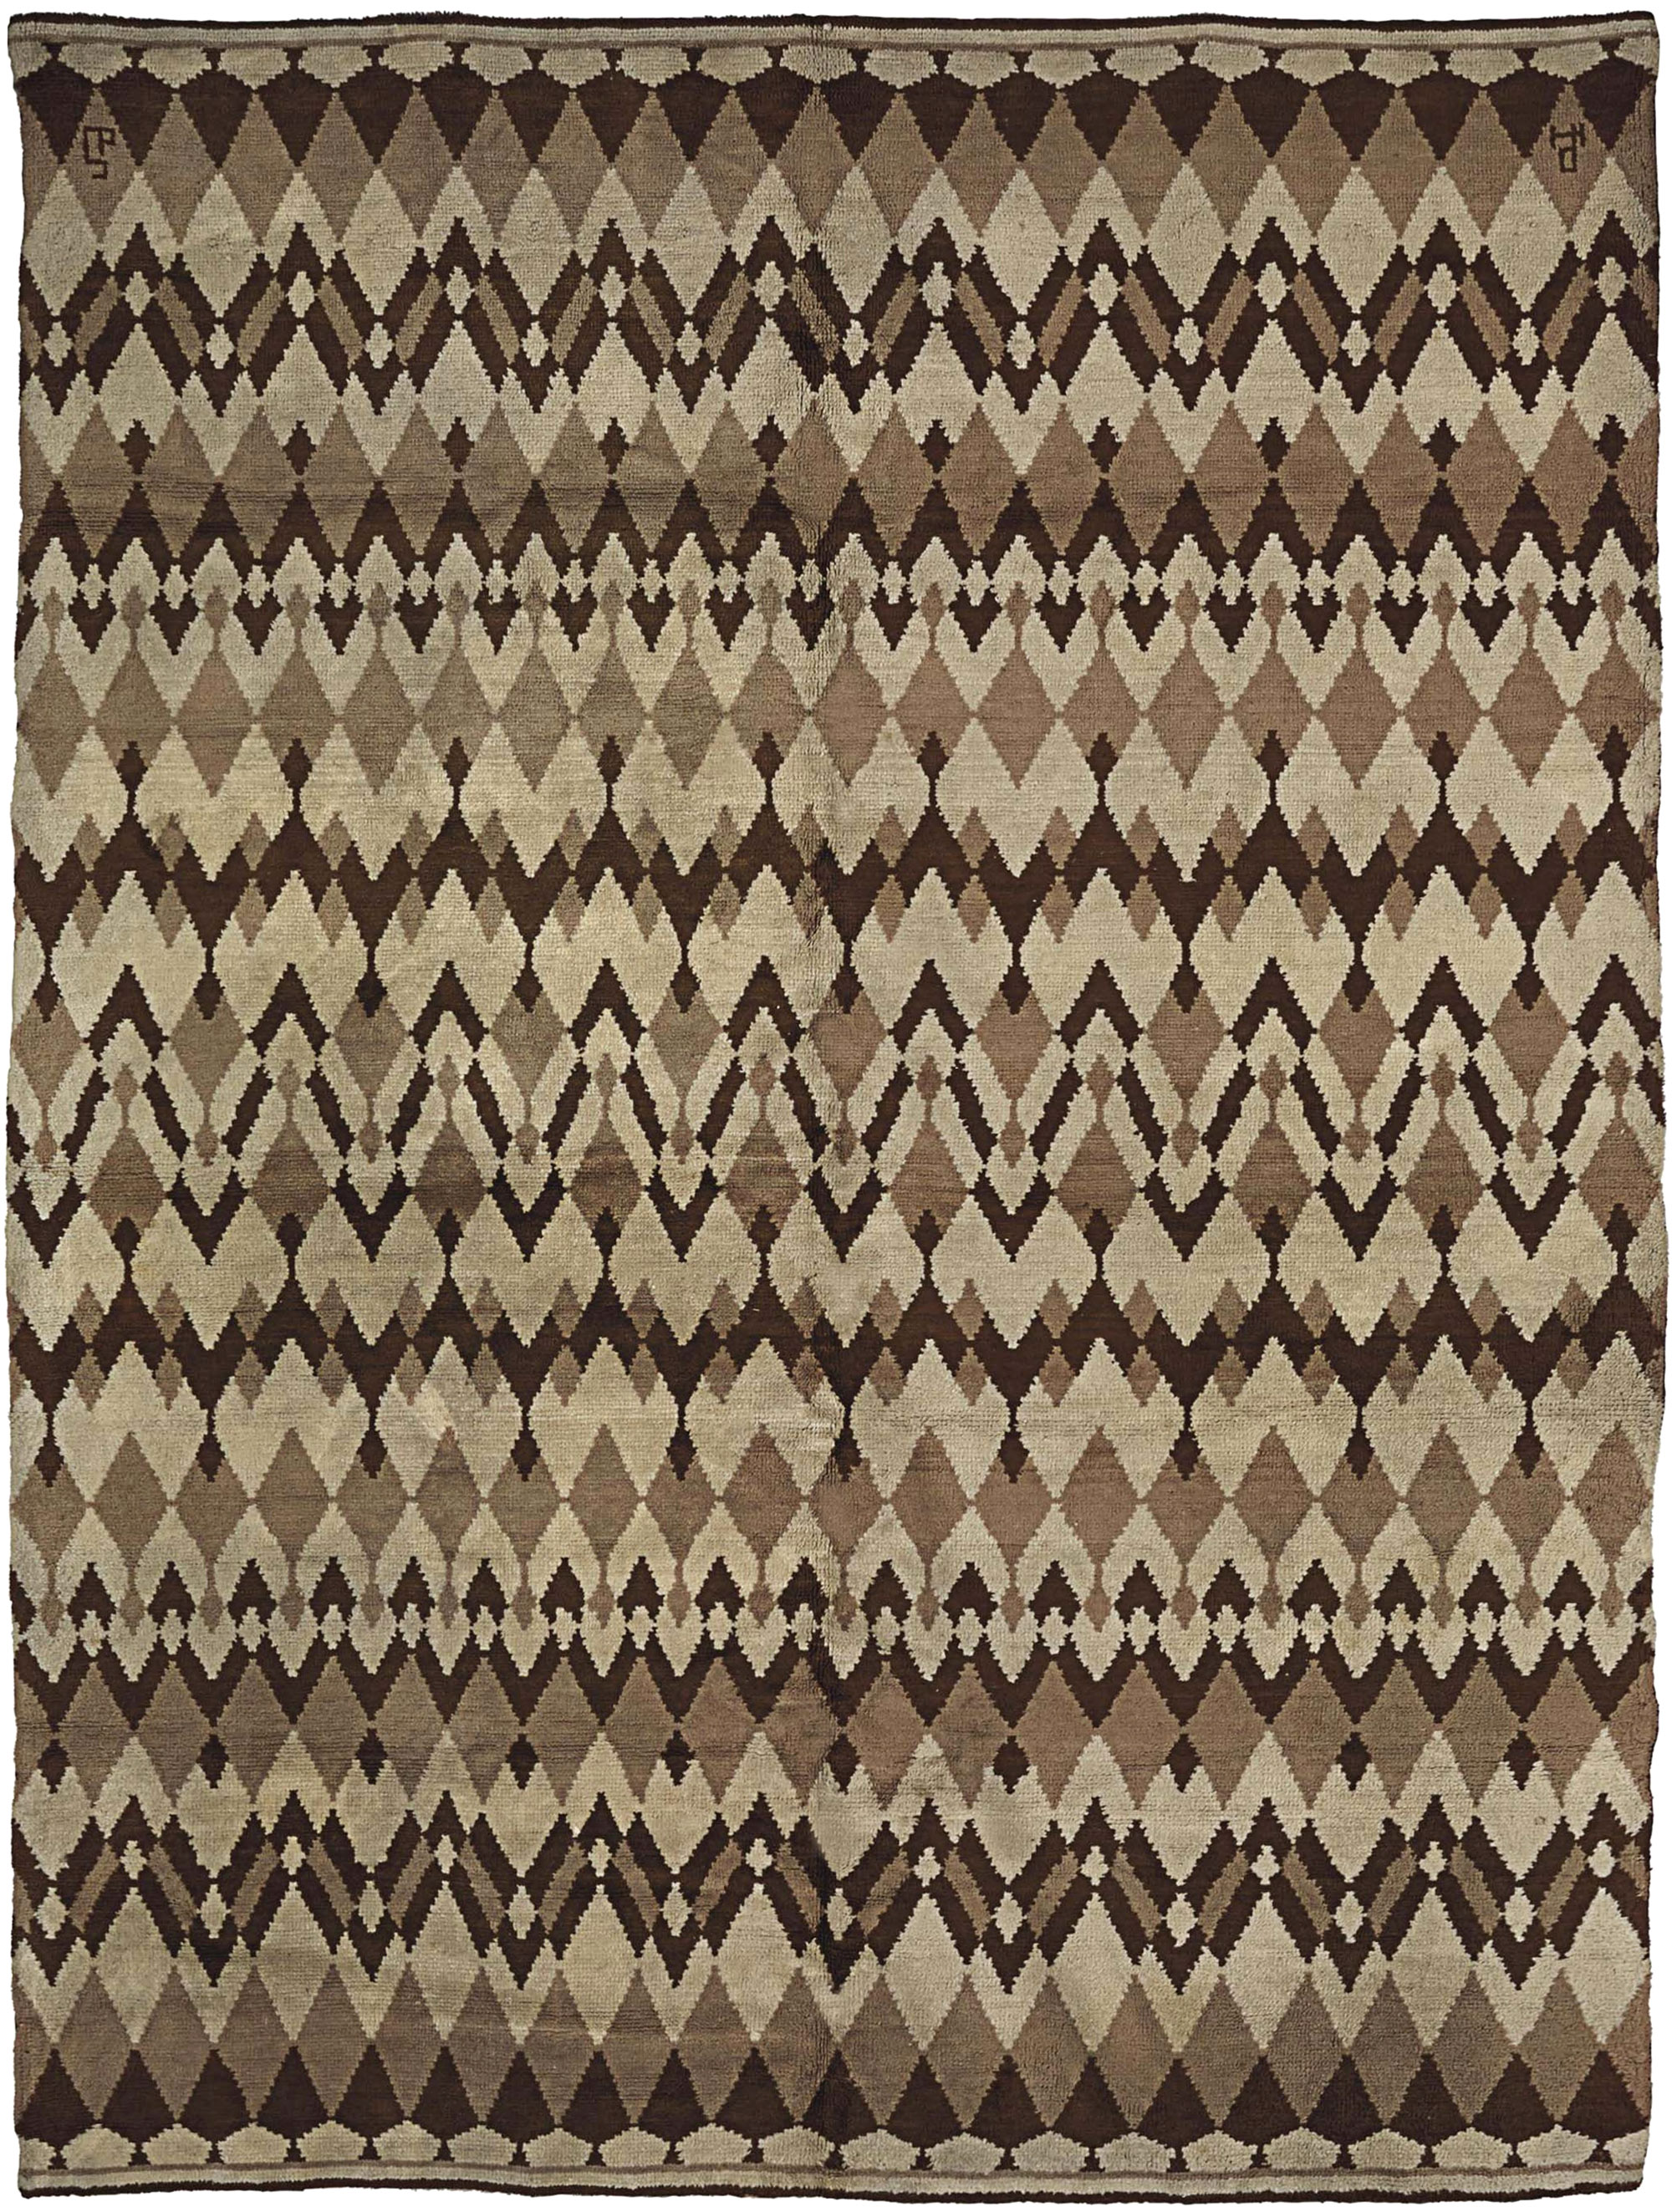 Mid-20th century French Art Deco Beige, Brown Wool Rug by Paul ...